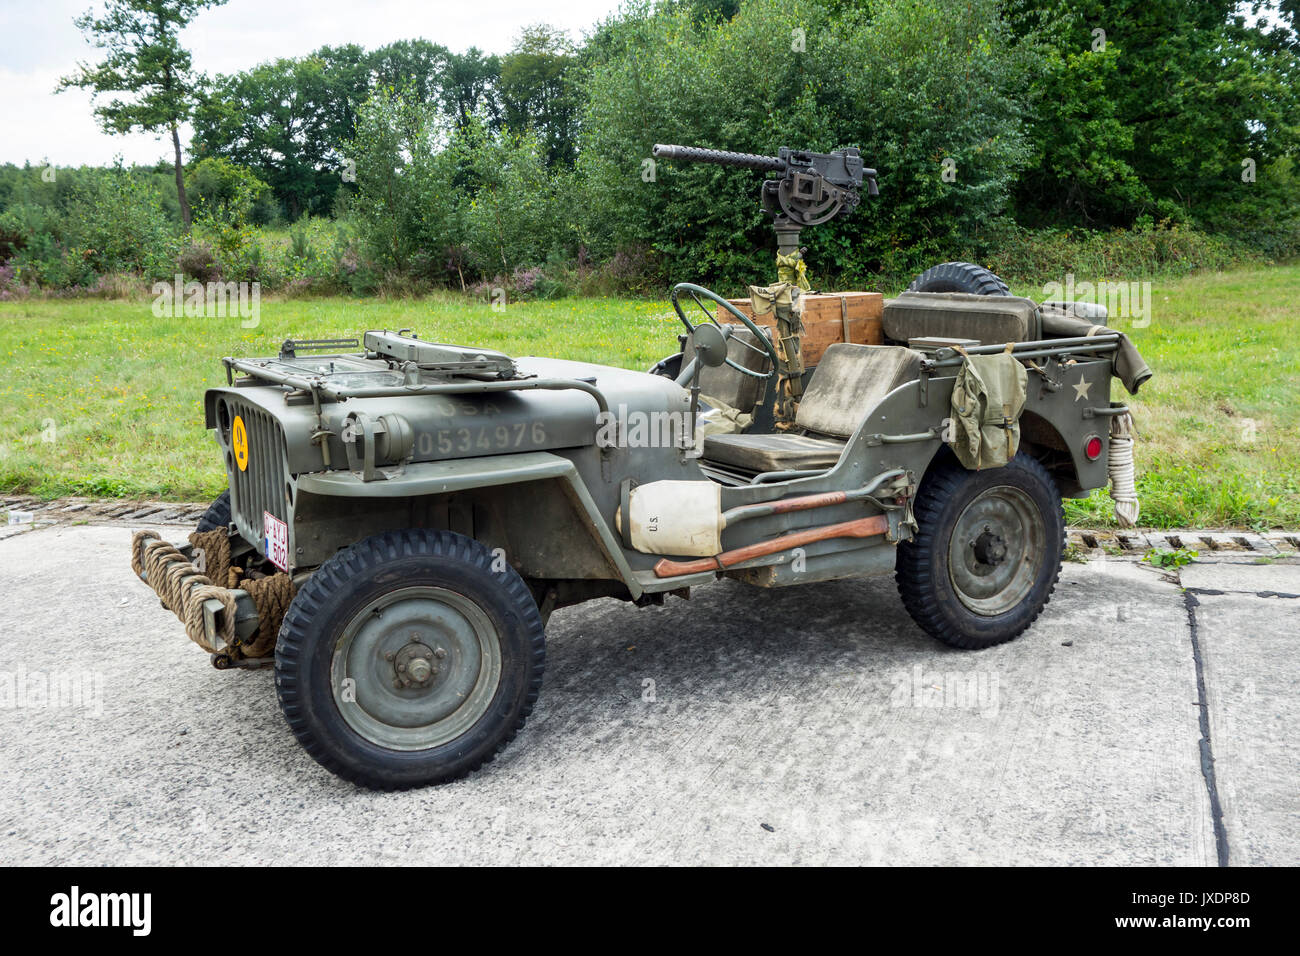 World War Two US Army Willys MB jeep, four-wheel drive utility vehicle with mounted M1919 Browning machine gun Stock Photo